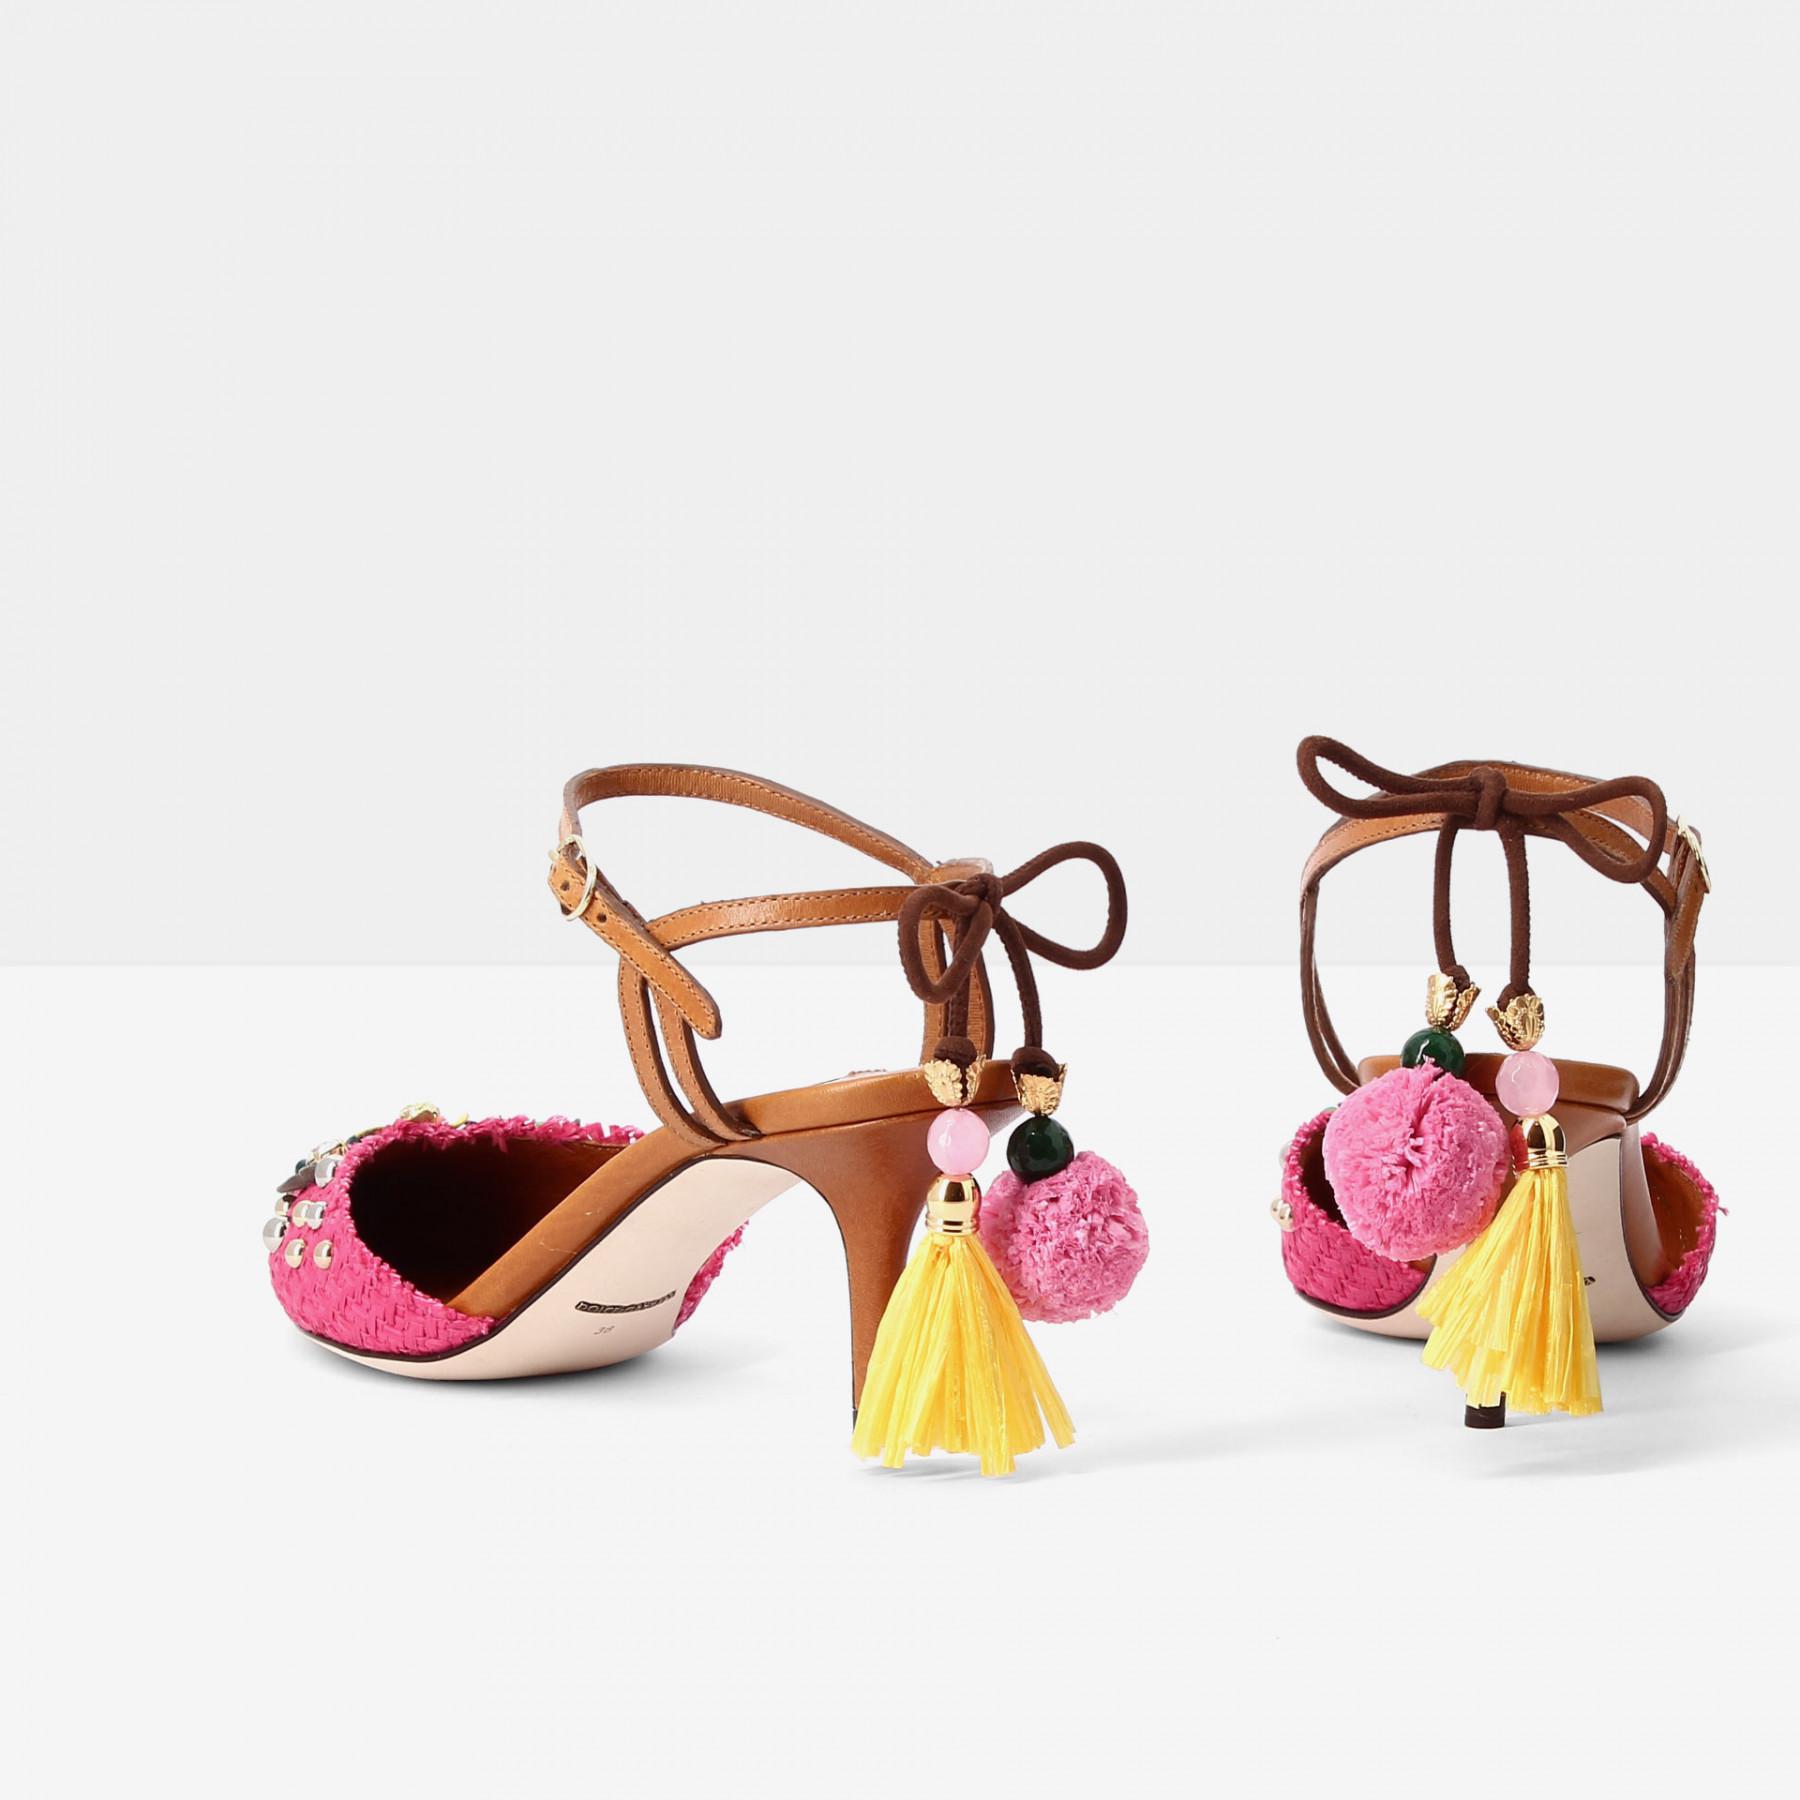 dolce and gabbana pineapple shoes